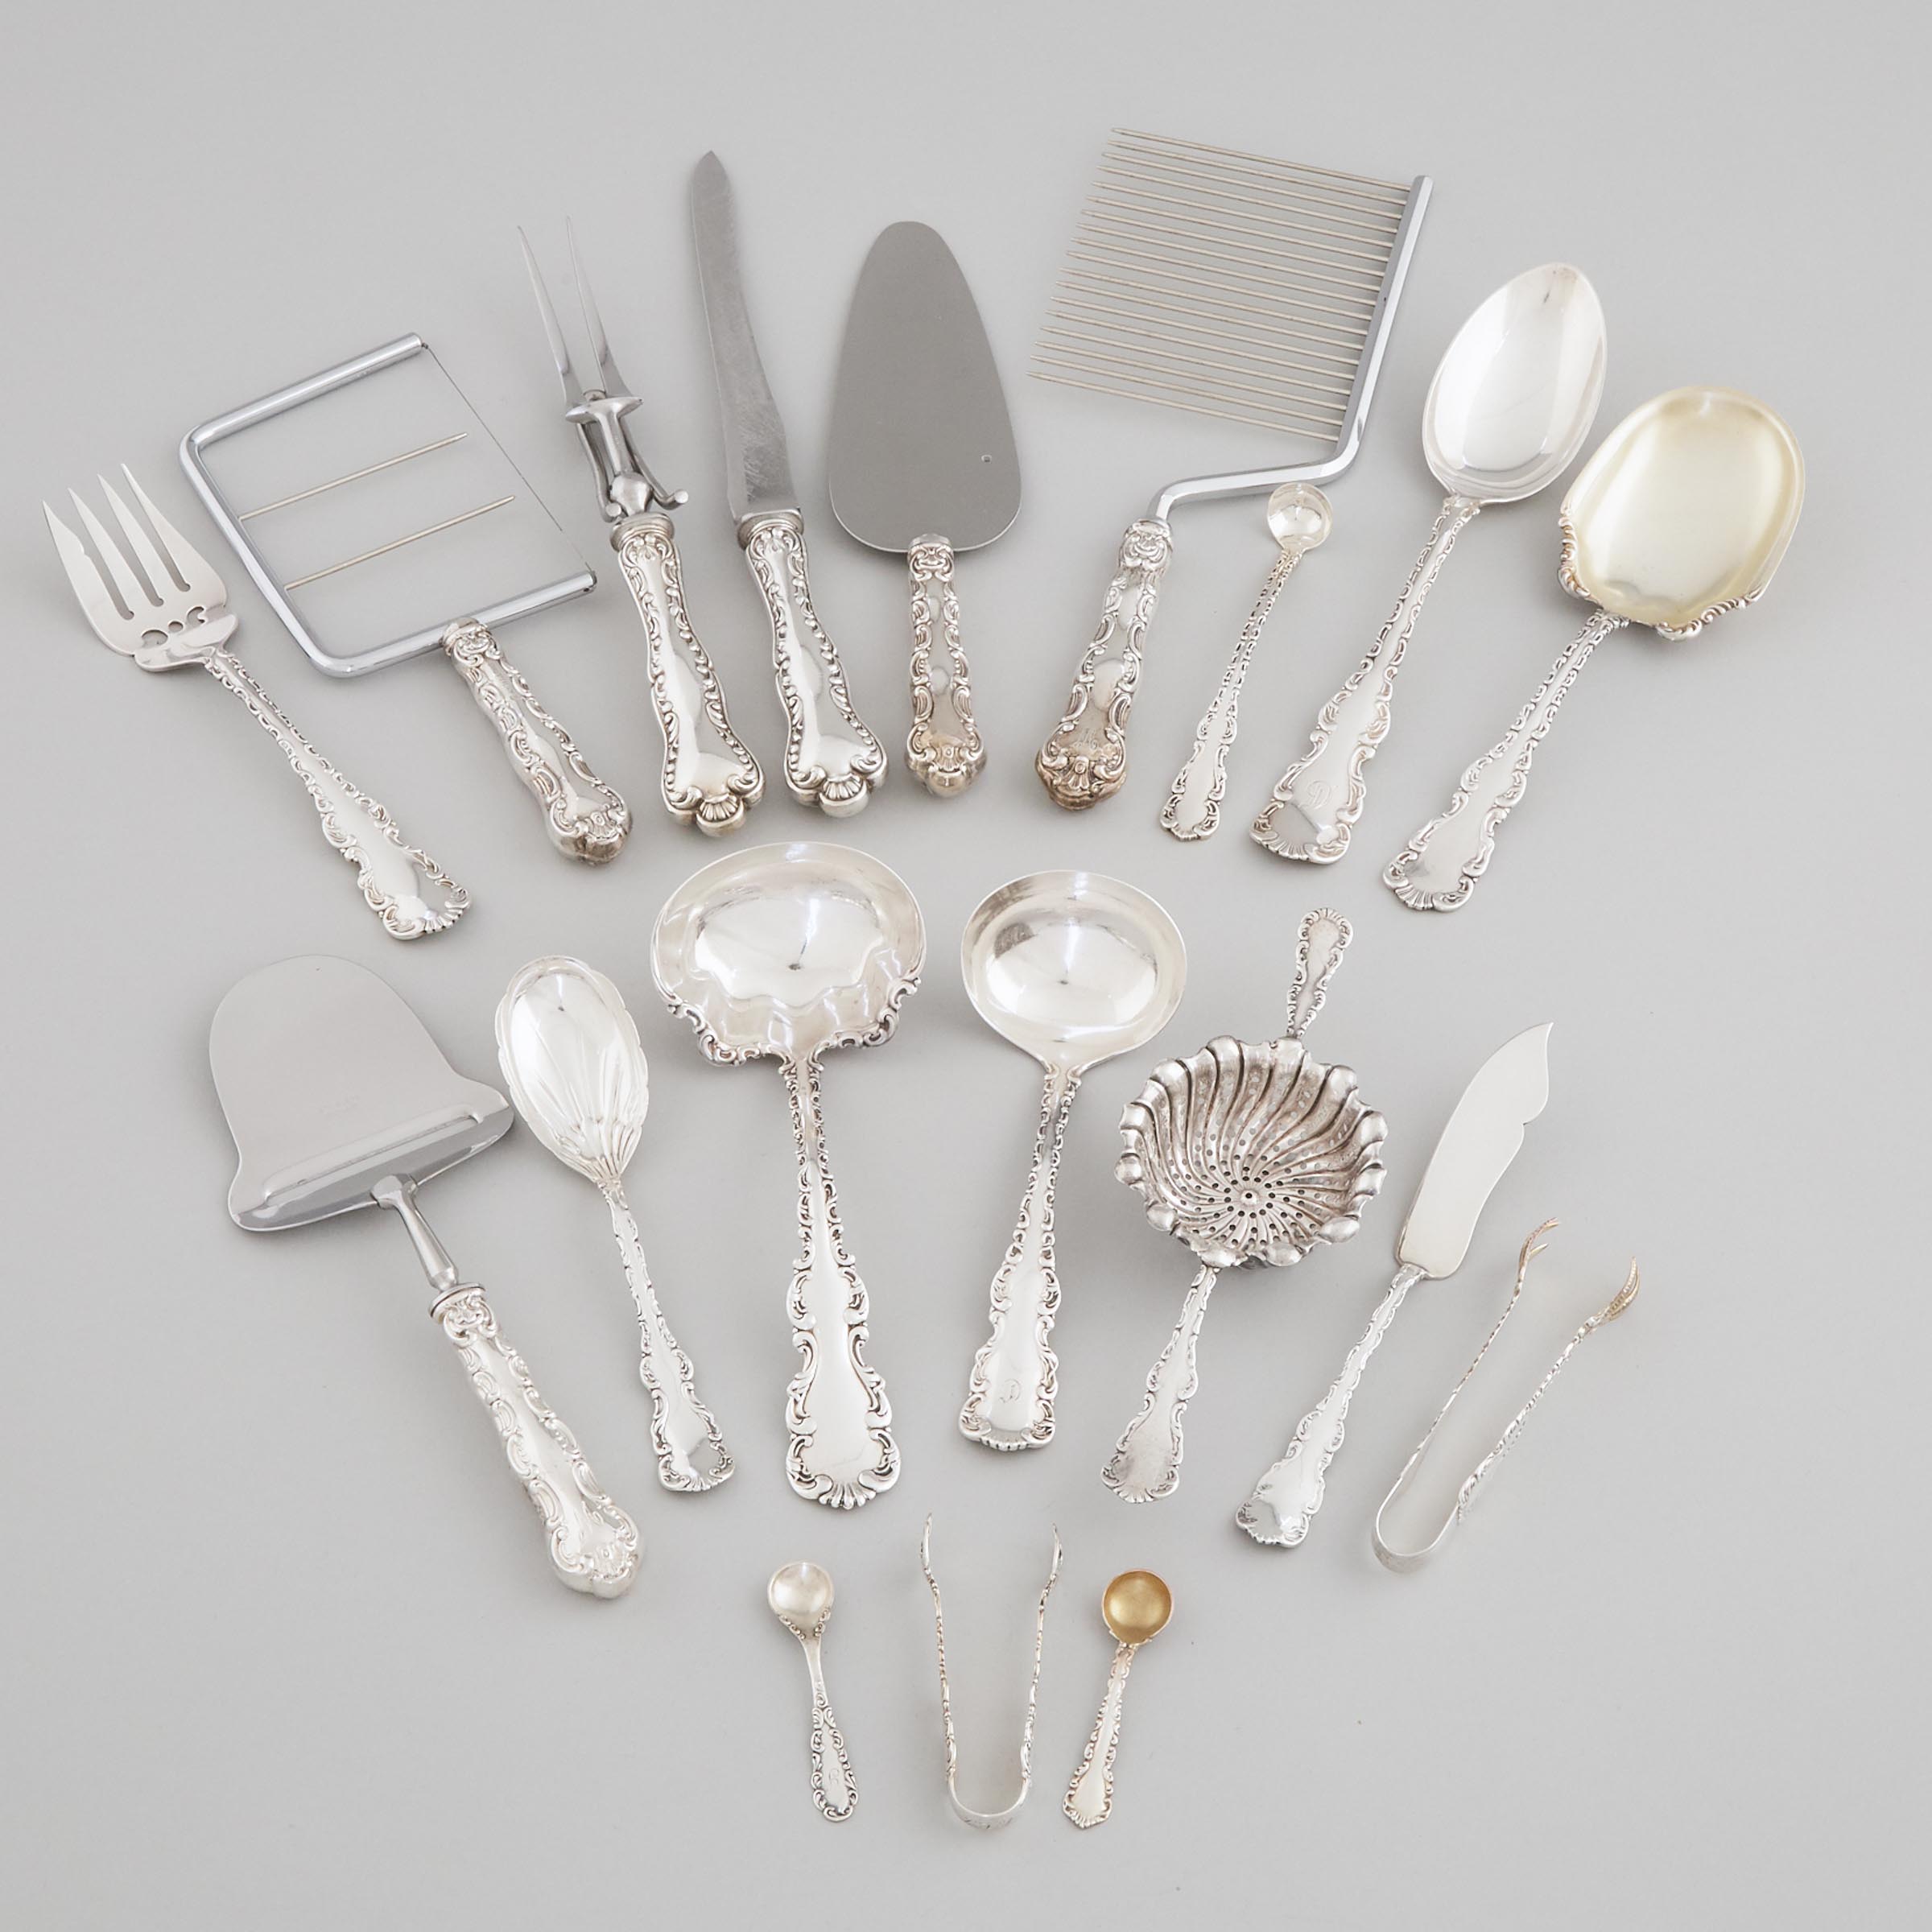 Canadian Silver 'Louis XV' Pattern Flatware, mainly Henry Birks & Sons, Montreal, Que., 20th century